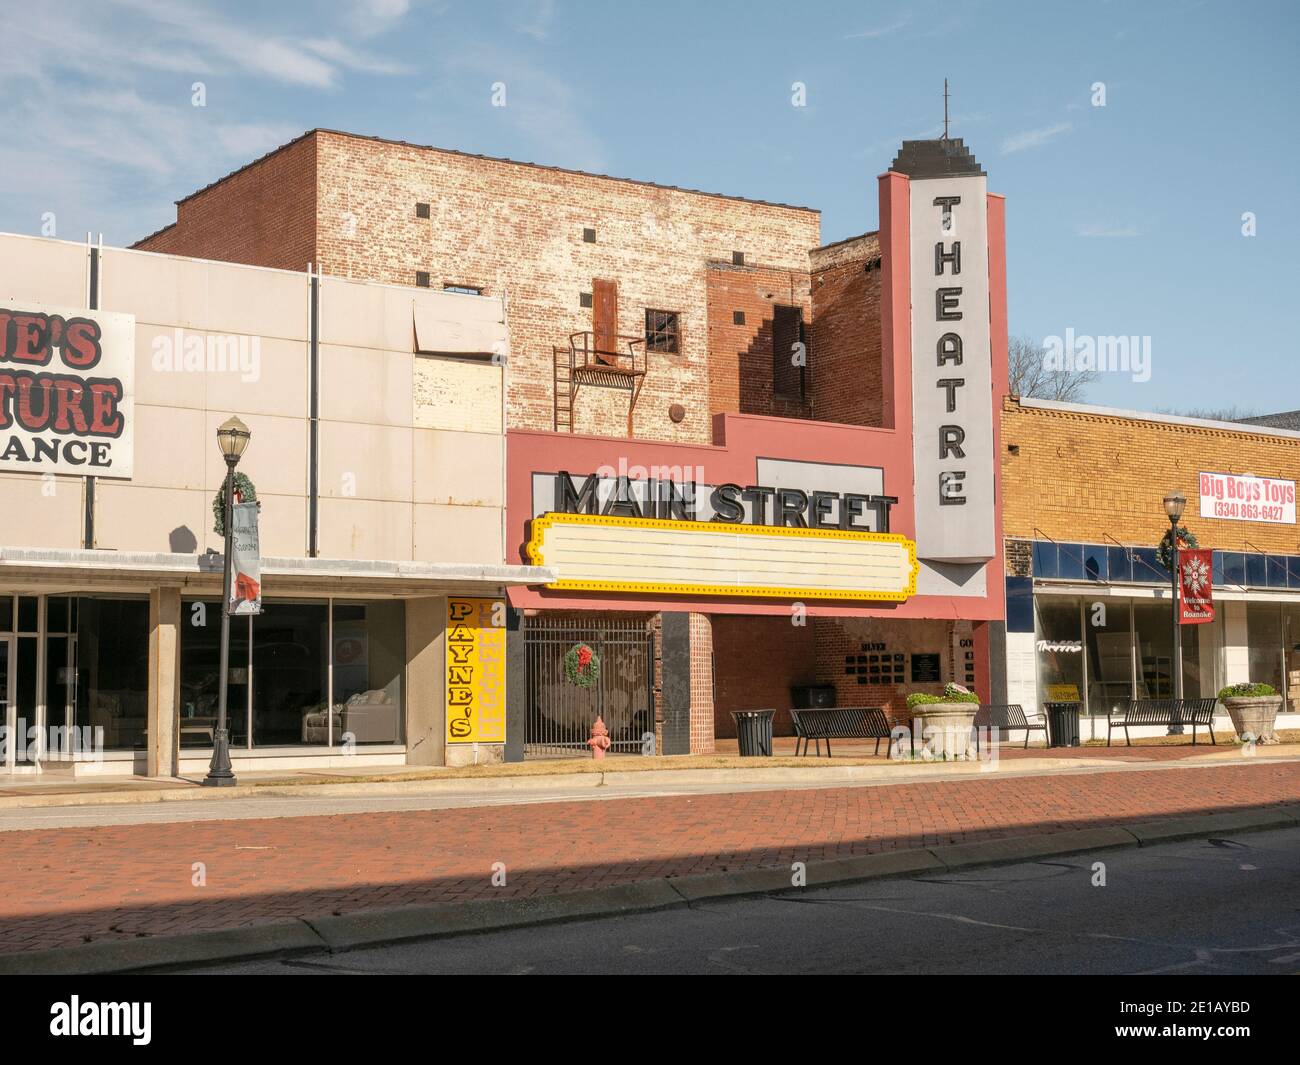 Main Street Theater a small movie theater in the small town rural town of Roanoke Alabama, USA. Stock Photo